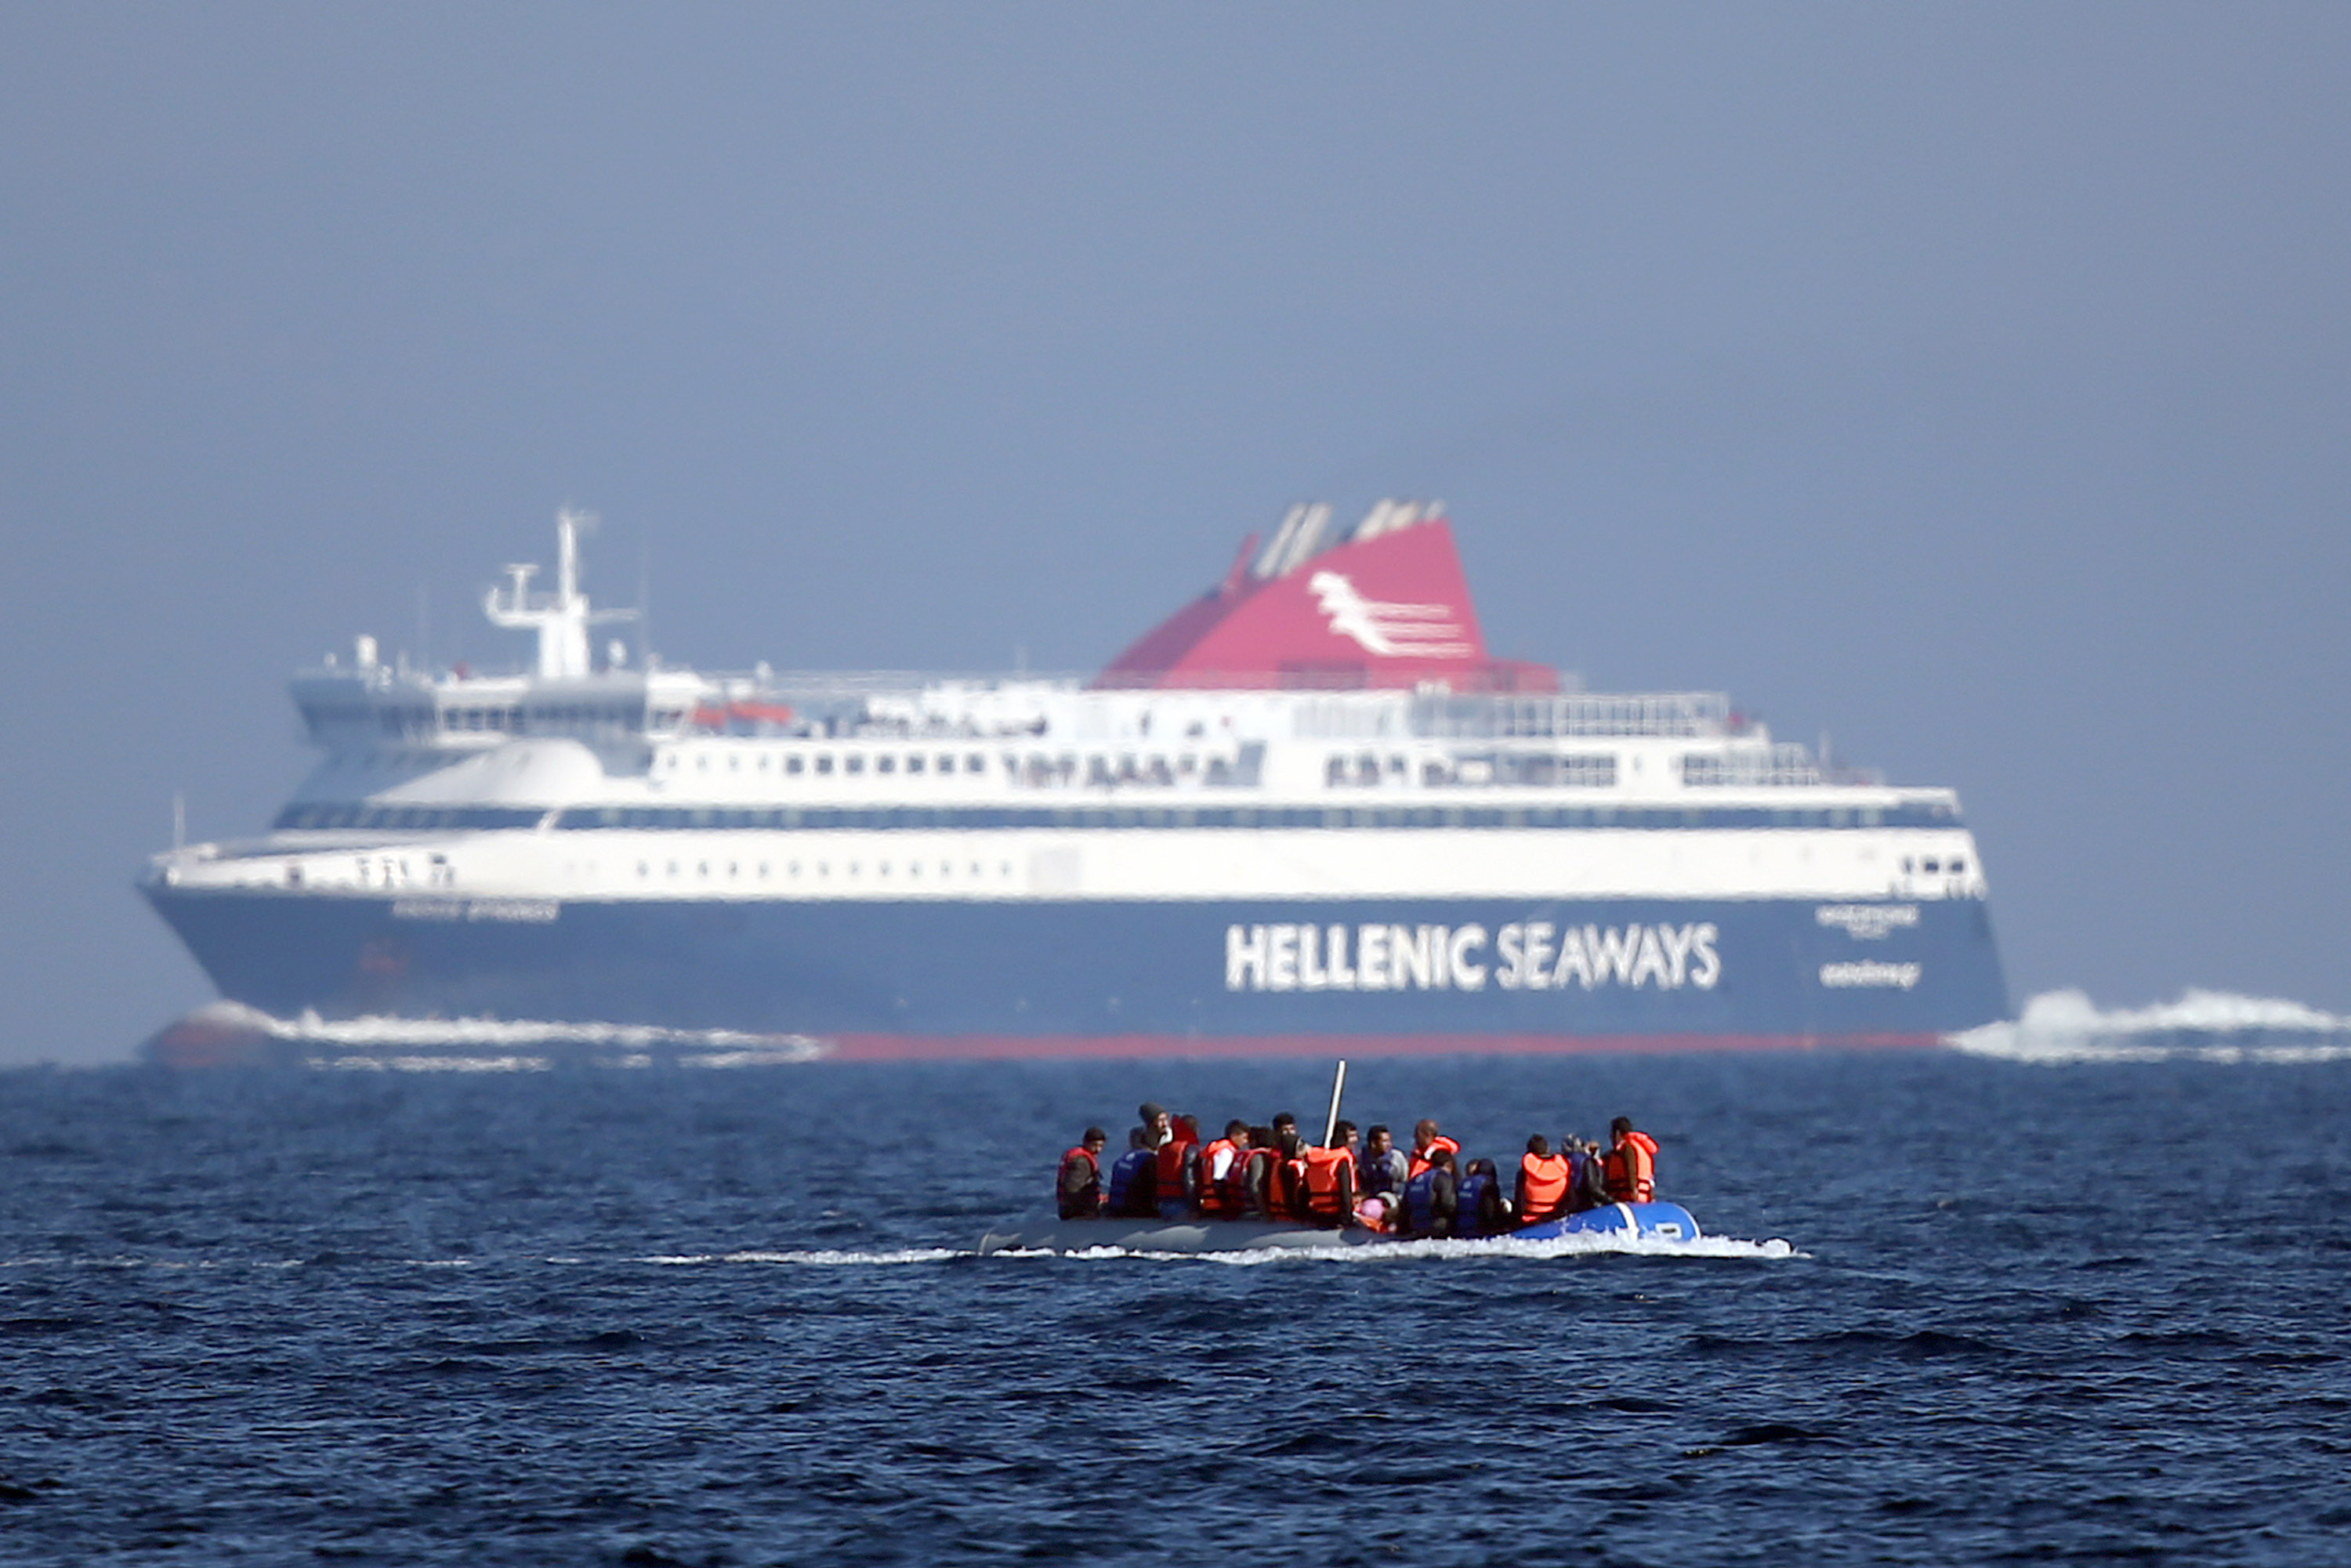 SIKAMINIAS, GREECE - NOVEMBER 14: A migrant boat passes a passenger ferry as it makes the crossing from Turkey to the Greek island of Lesbos on November 14, 2015 in Sikaminias, Greece. Rafts and boats continue to make the journey from Turkey to Lesbos each day as thousands flee conflict in Iraq, Syria, Afghanistan and other countries. Over 500,000 migrants have entered Europe so far this year and approximately four-fifths of those have paid to be smuggled by sea to Greece from Turkey, the main transit route into the EU. Most of those entering Greece on a boat from Turkey are from the war zones of Syria, Iraq and Afghanistan. (Photo by Carl Court/Getty Images)